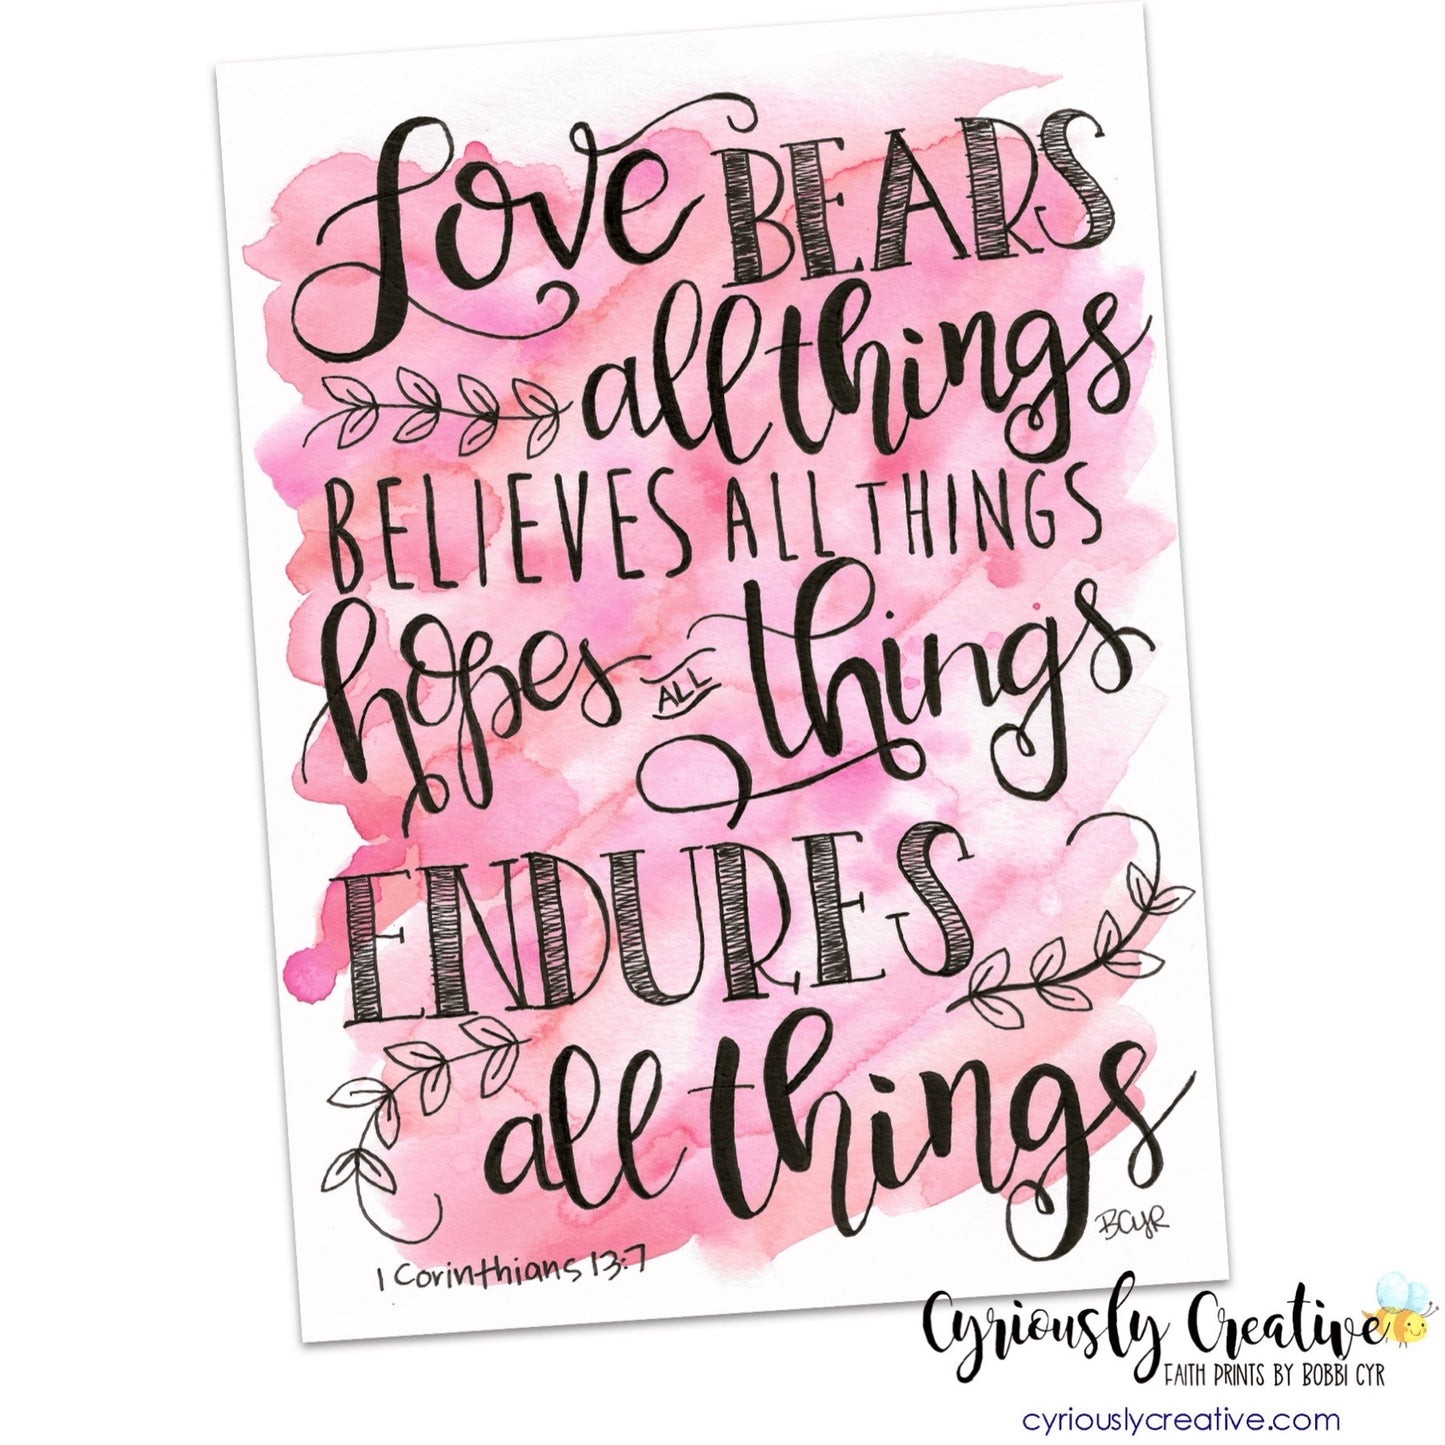 Good things Are Coming - UVDTF – Sevenheartsprints